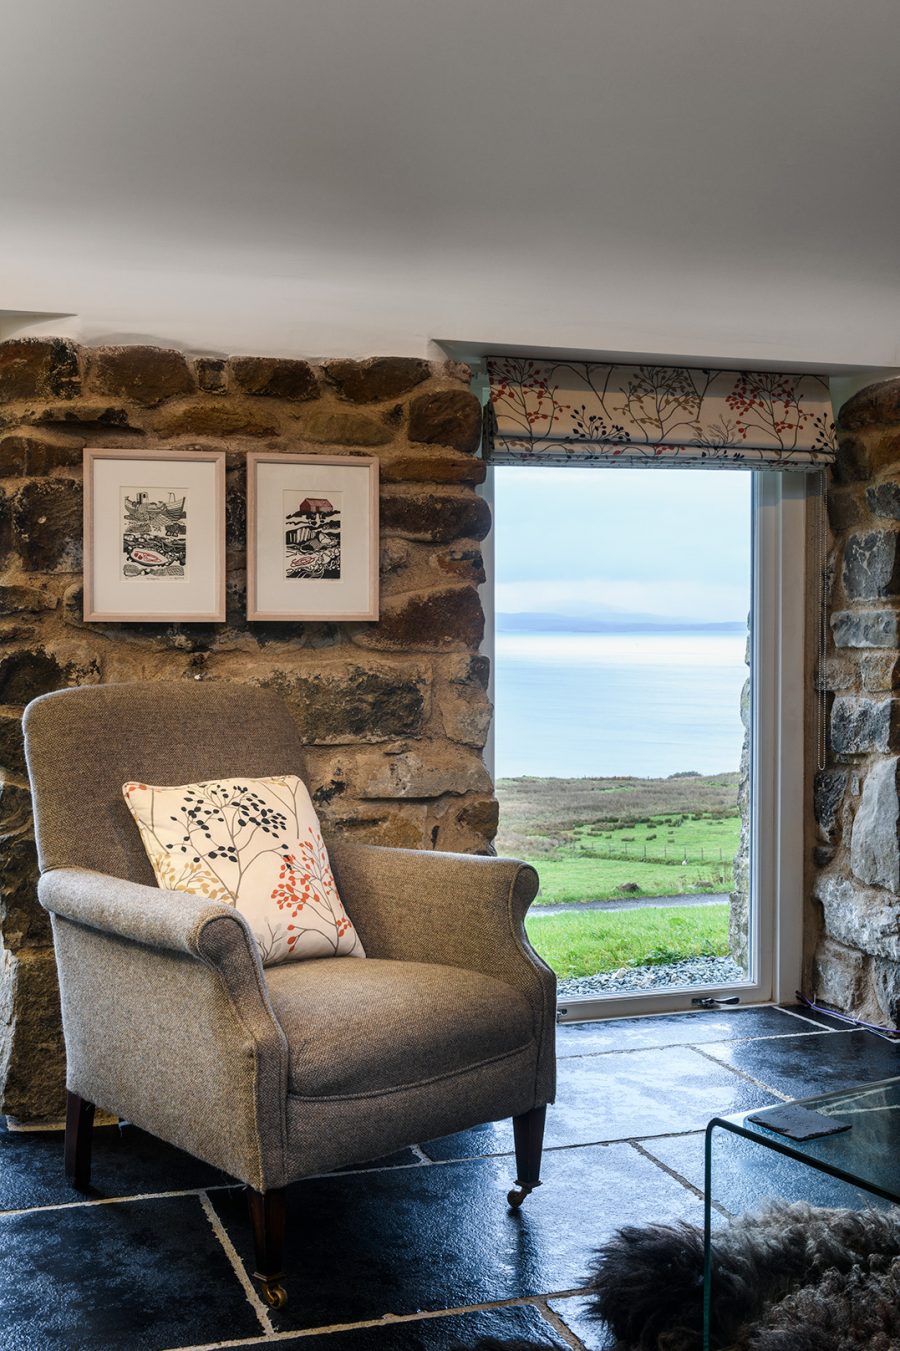 Blackhouse luxury self-catering cottage. Think Harris tweed furnishings, local sheepskins and and sheepskins.